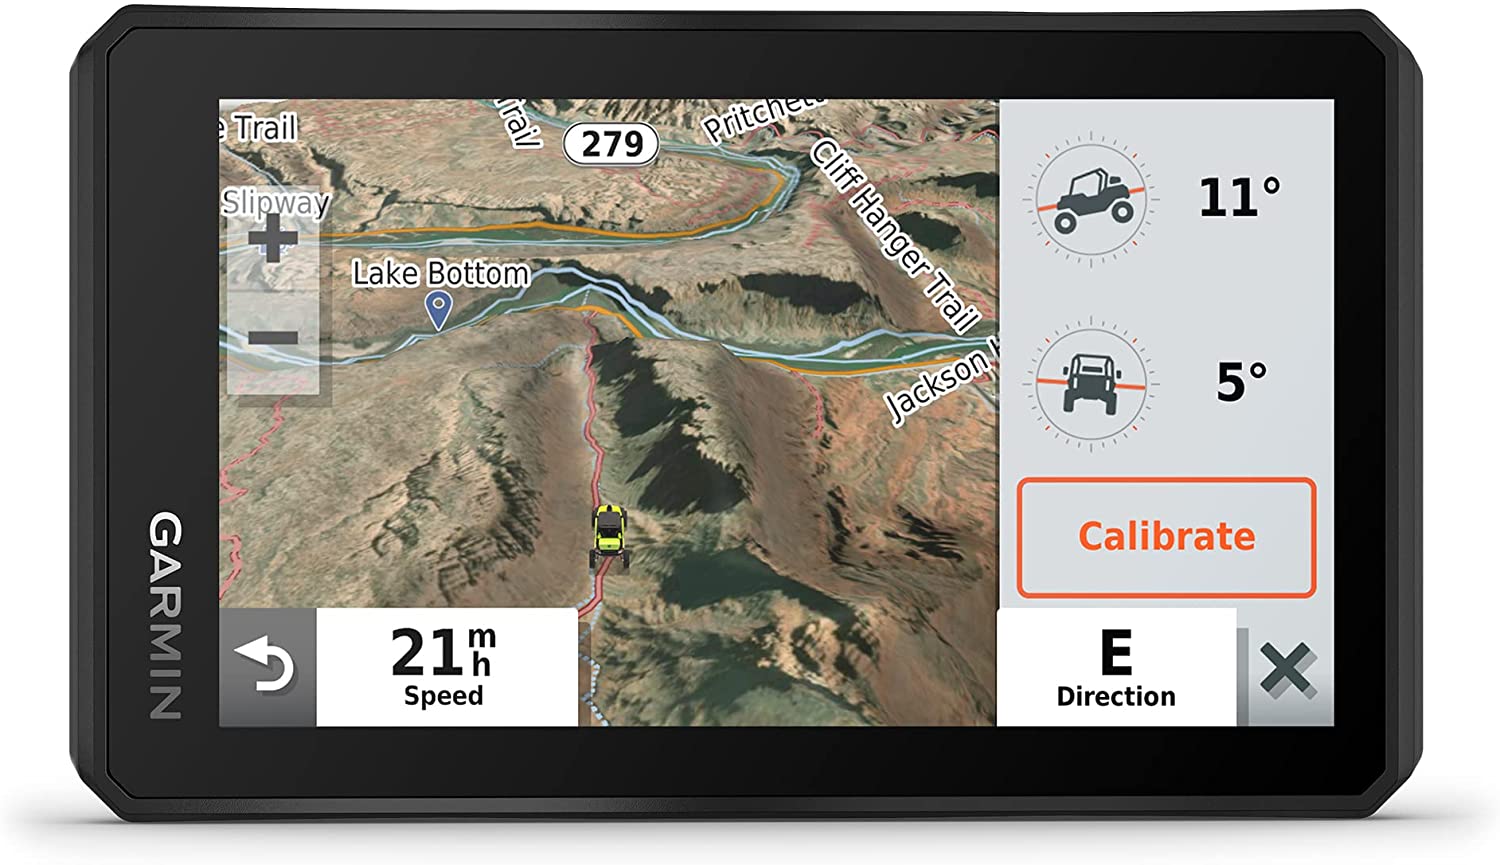 Garmin - Tread Powersport Off-Road Navigator, with Topographic Mapping